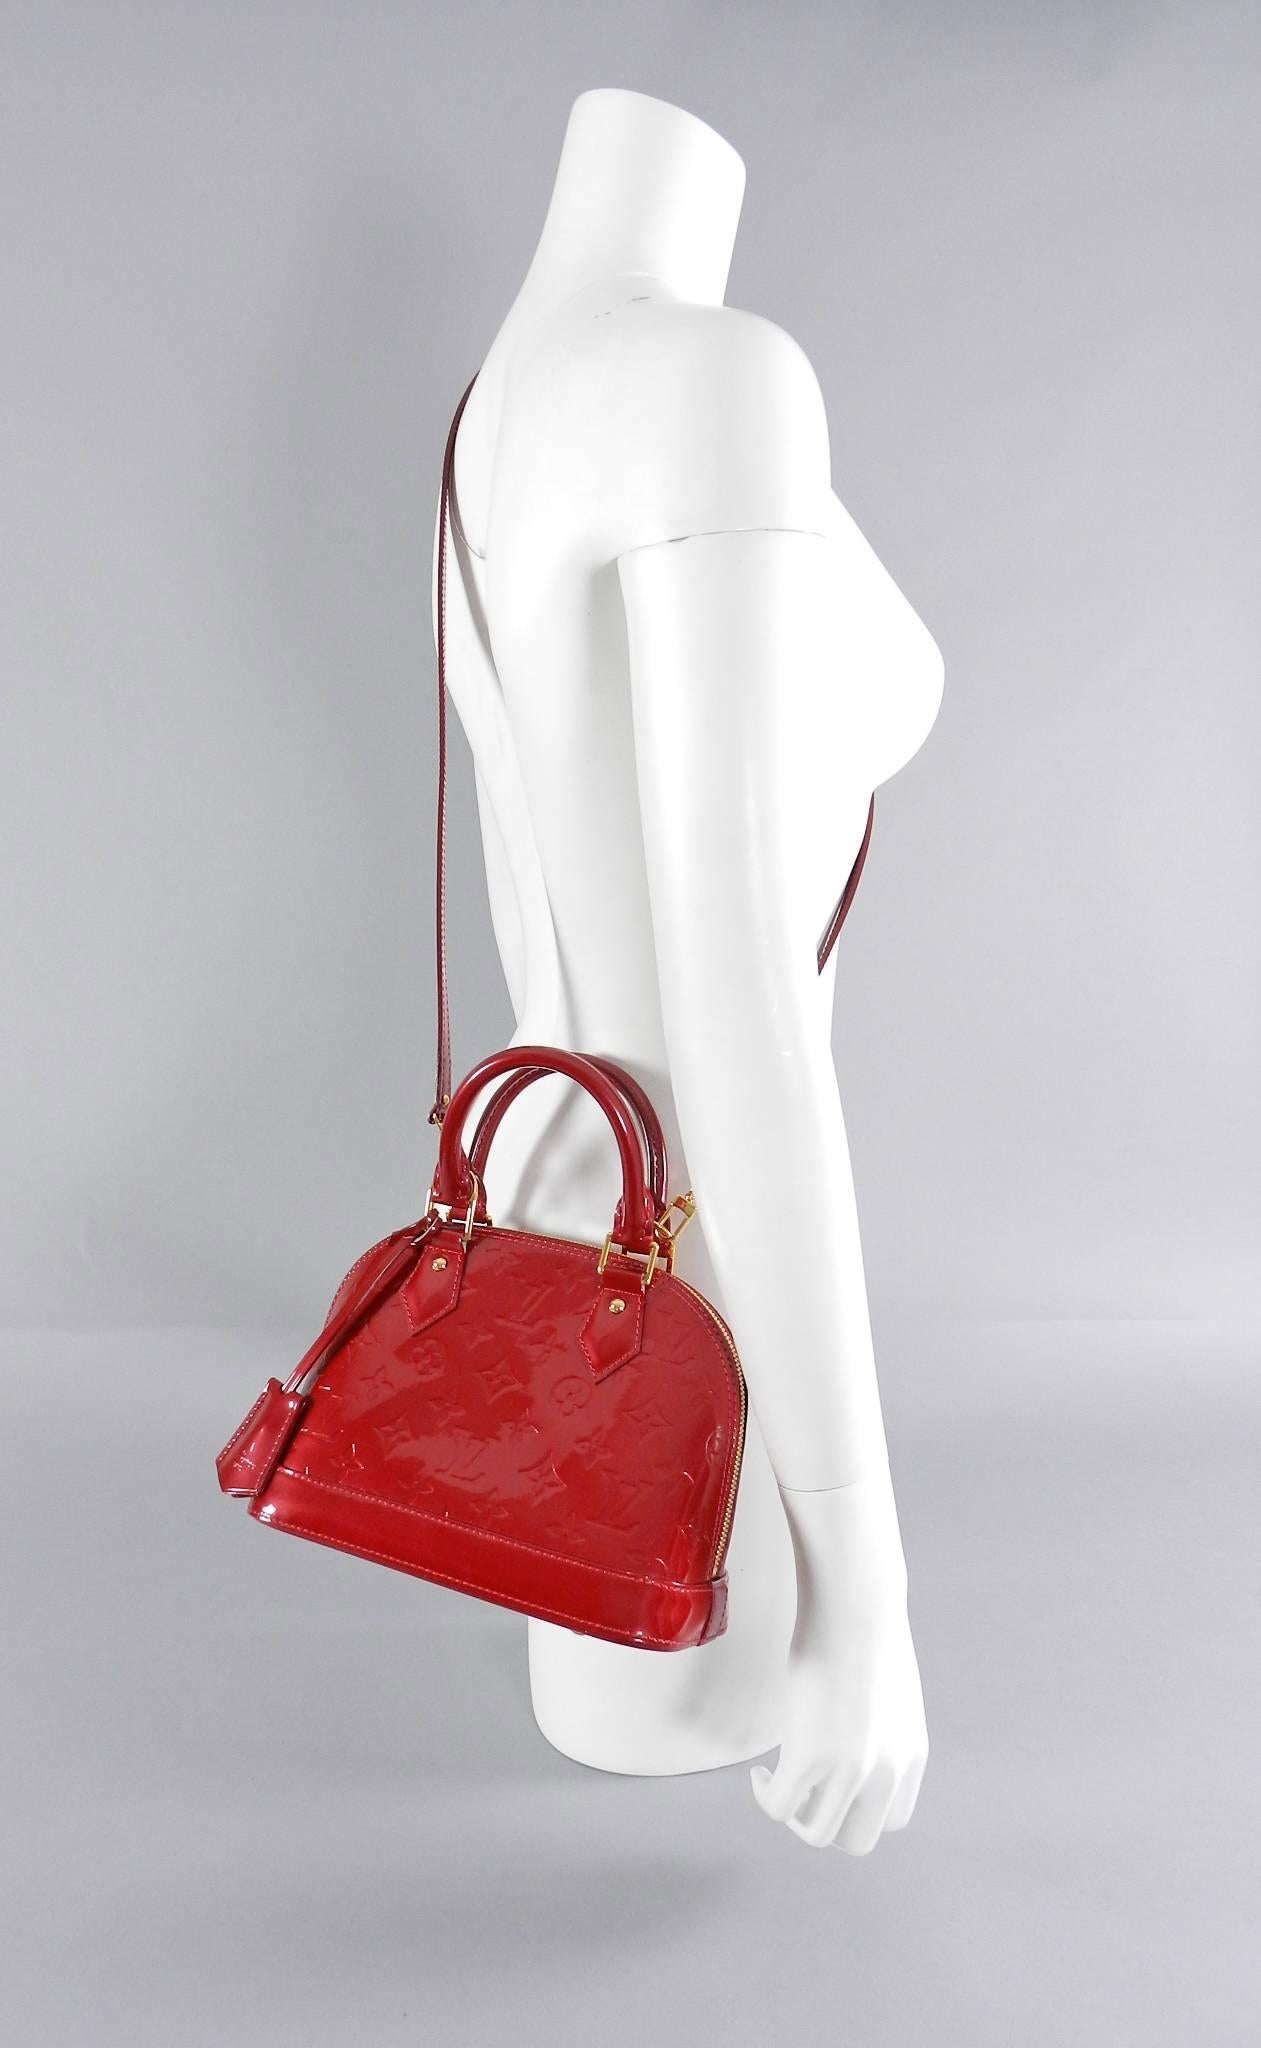 Louis Vuitton Alma BB in Cherry Vernis - mini size.  Excellent pre-owned - like new - worn once. Includes duster, strap, lock, clochette, 2 keys.  Date code reads SD3143. Body of bag measures 9.5 x 7 x 4.5" with a 22" drop strap.  

We